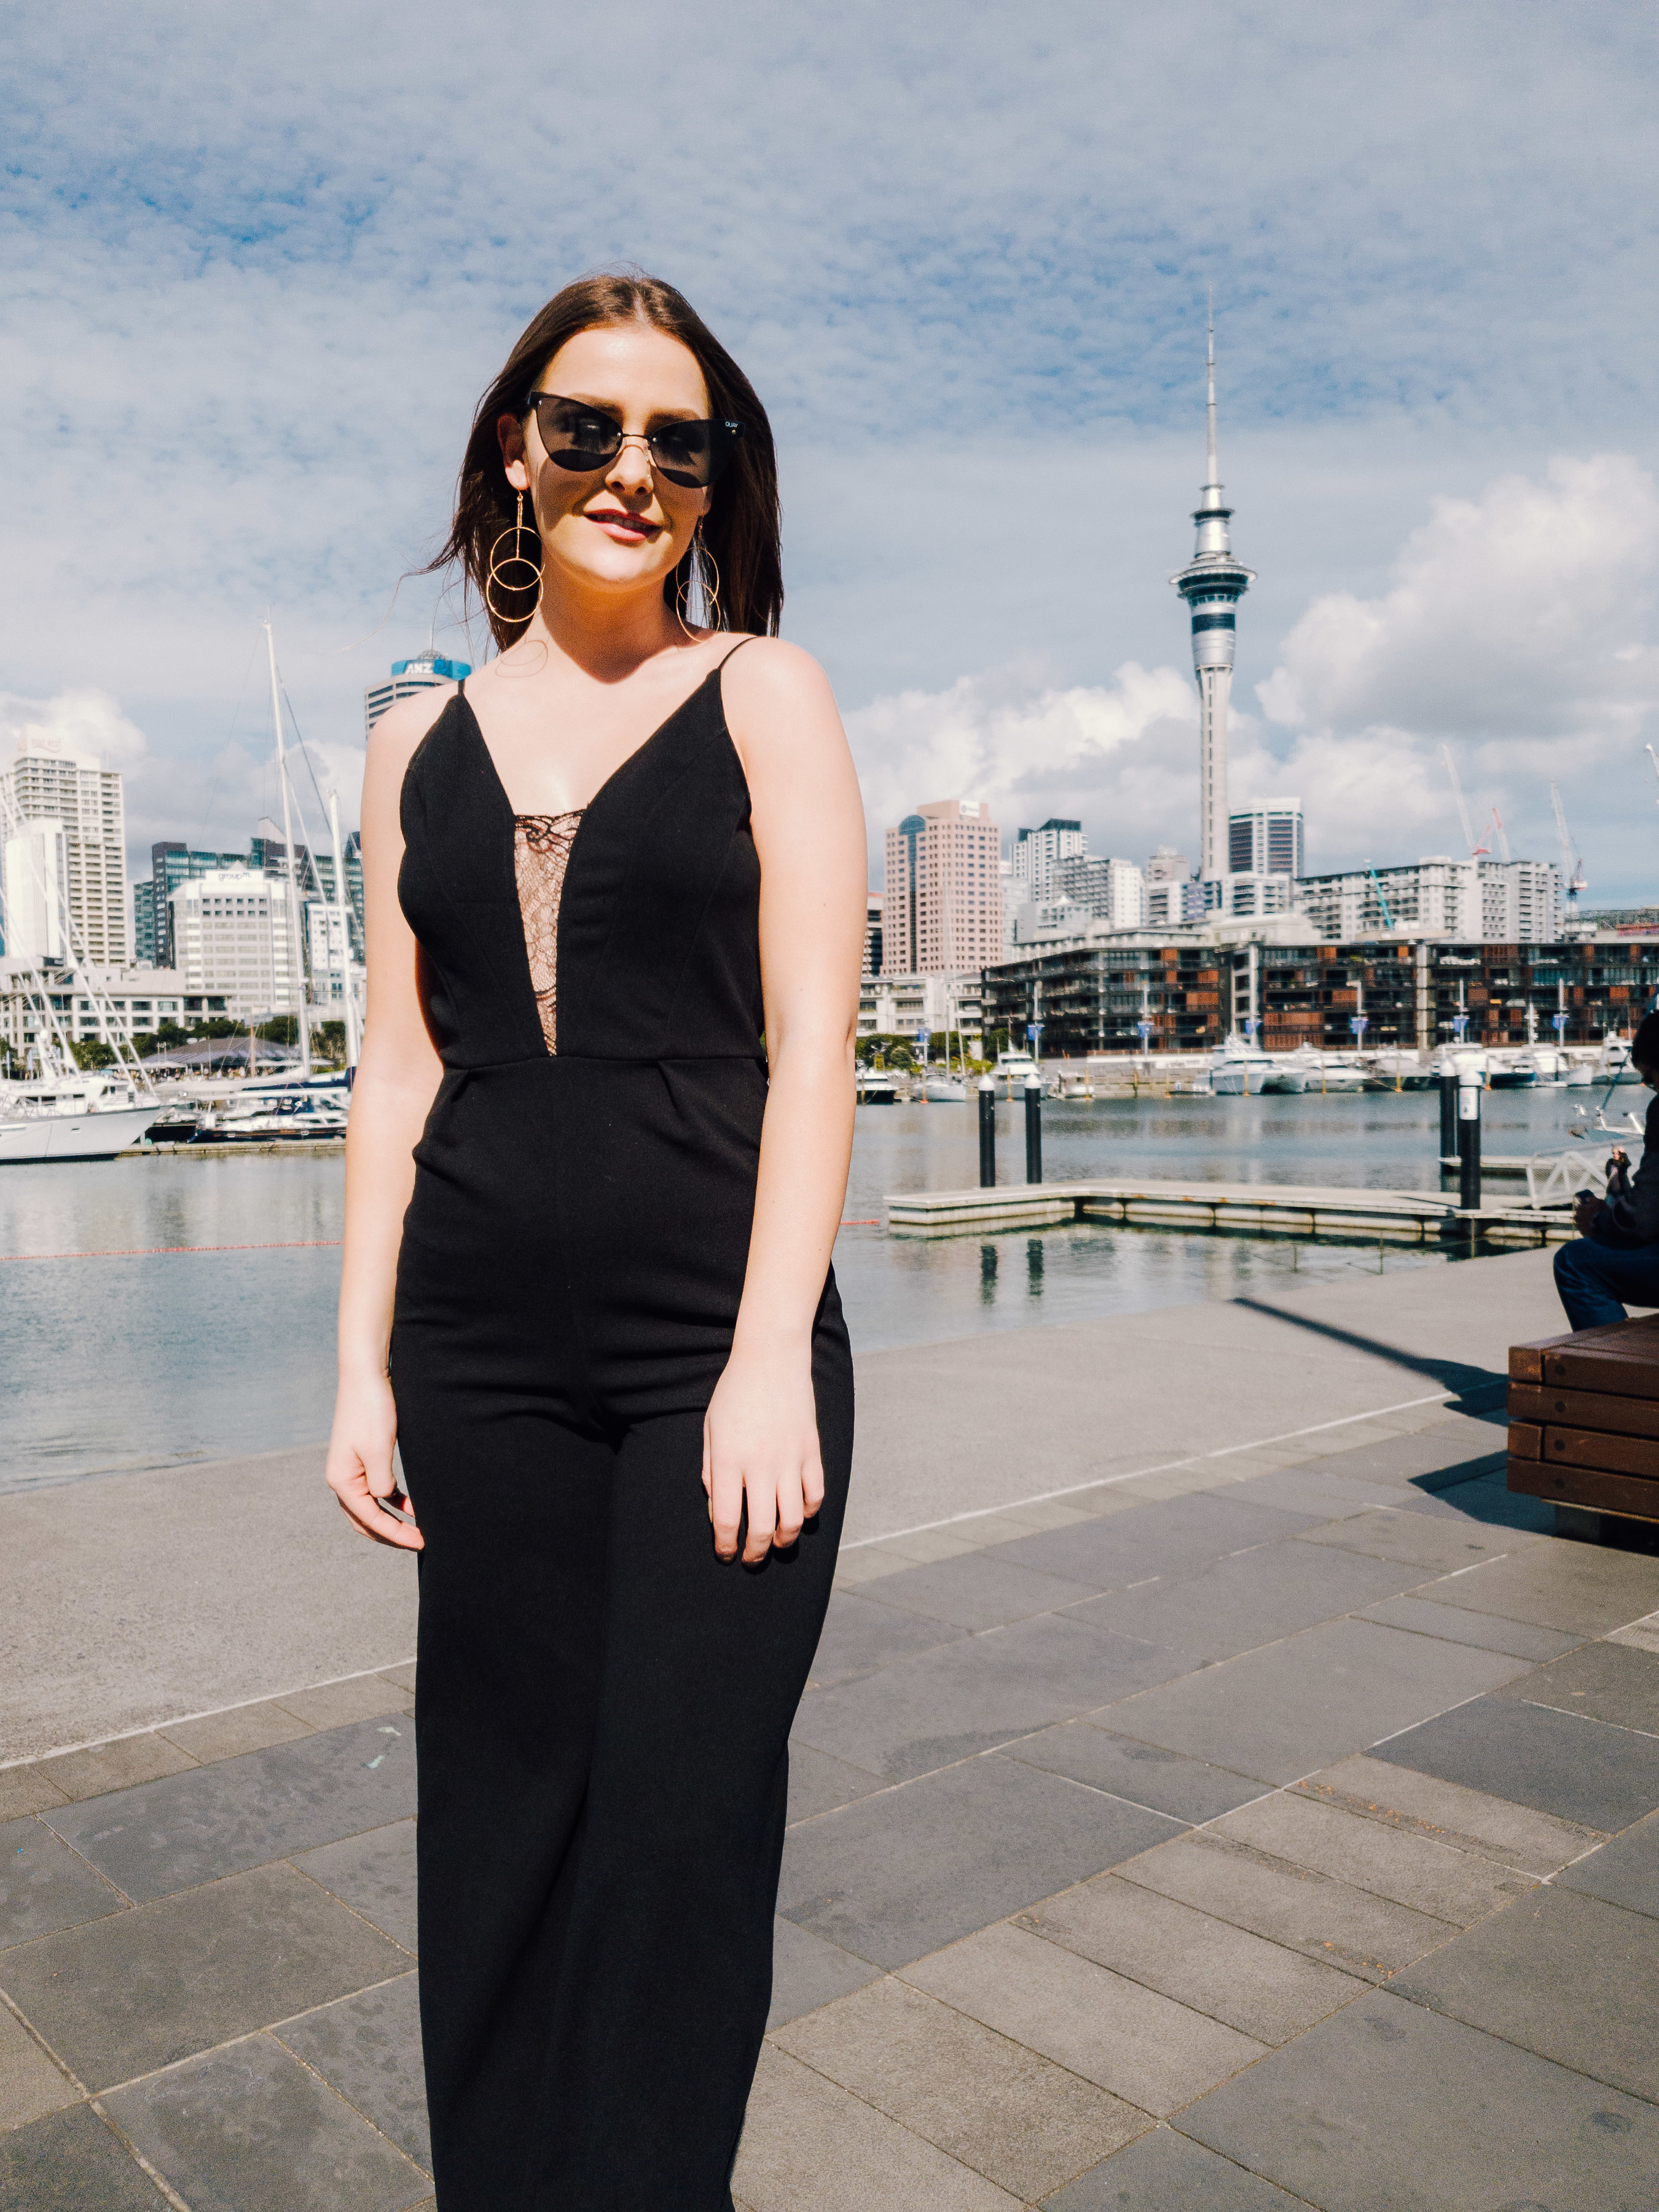 Street style at NZFW 2018: Saturday taken on the new Samsung Galaxy Note9 by Ben Loader